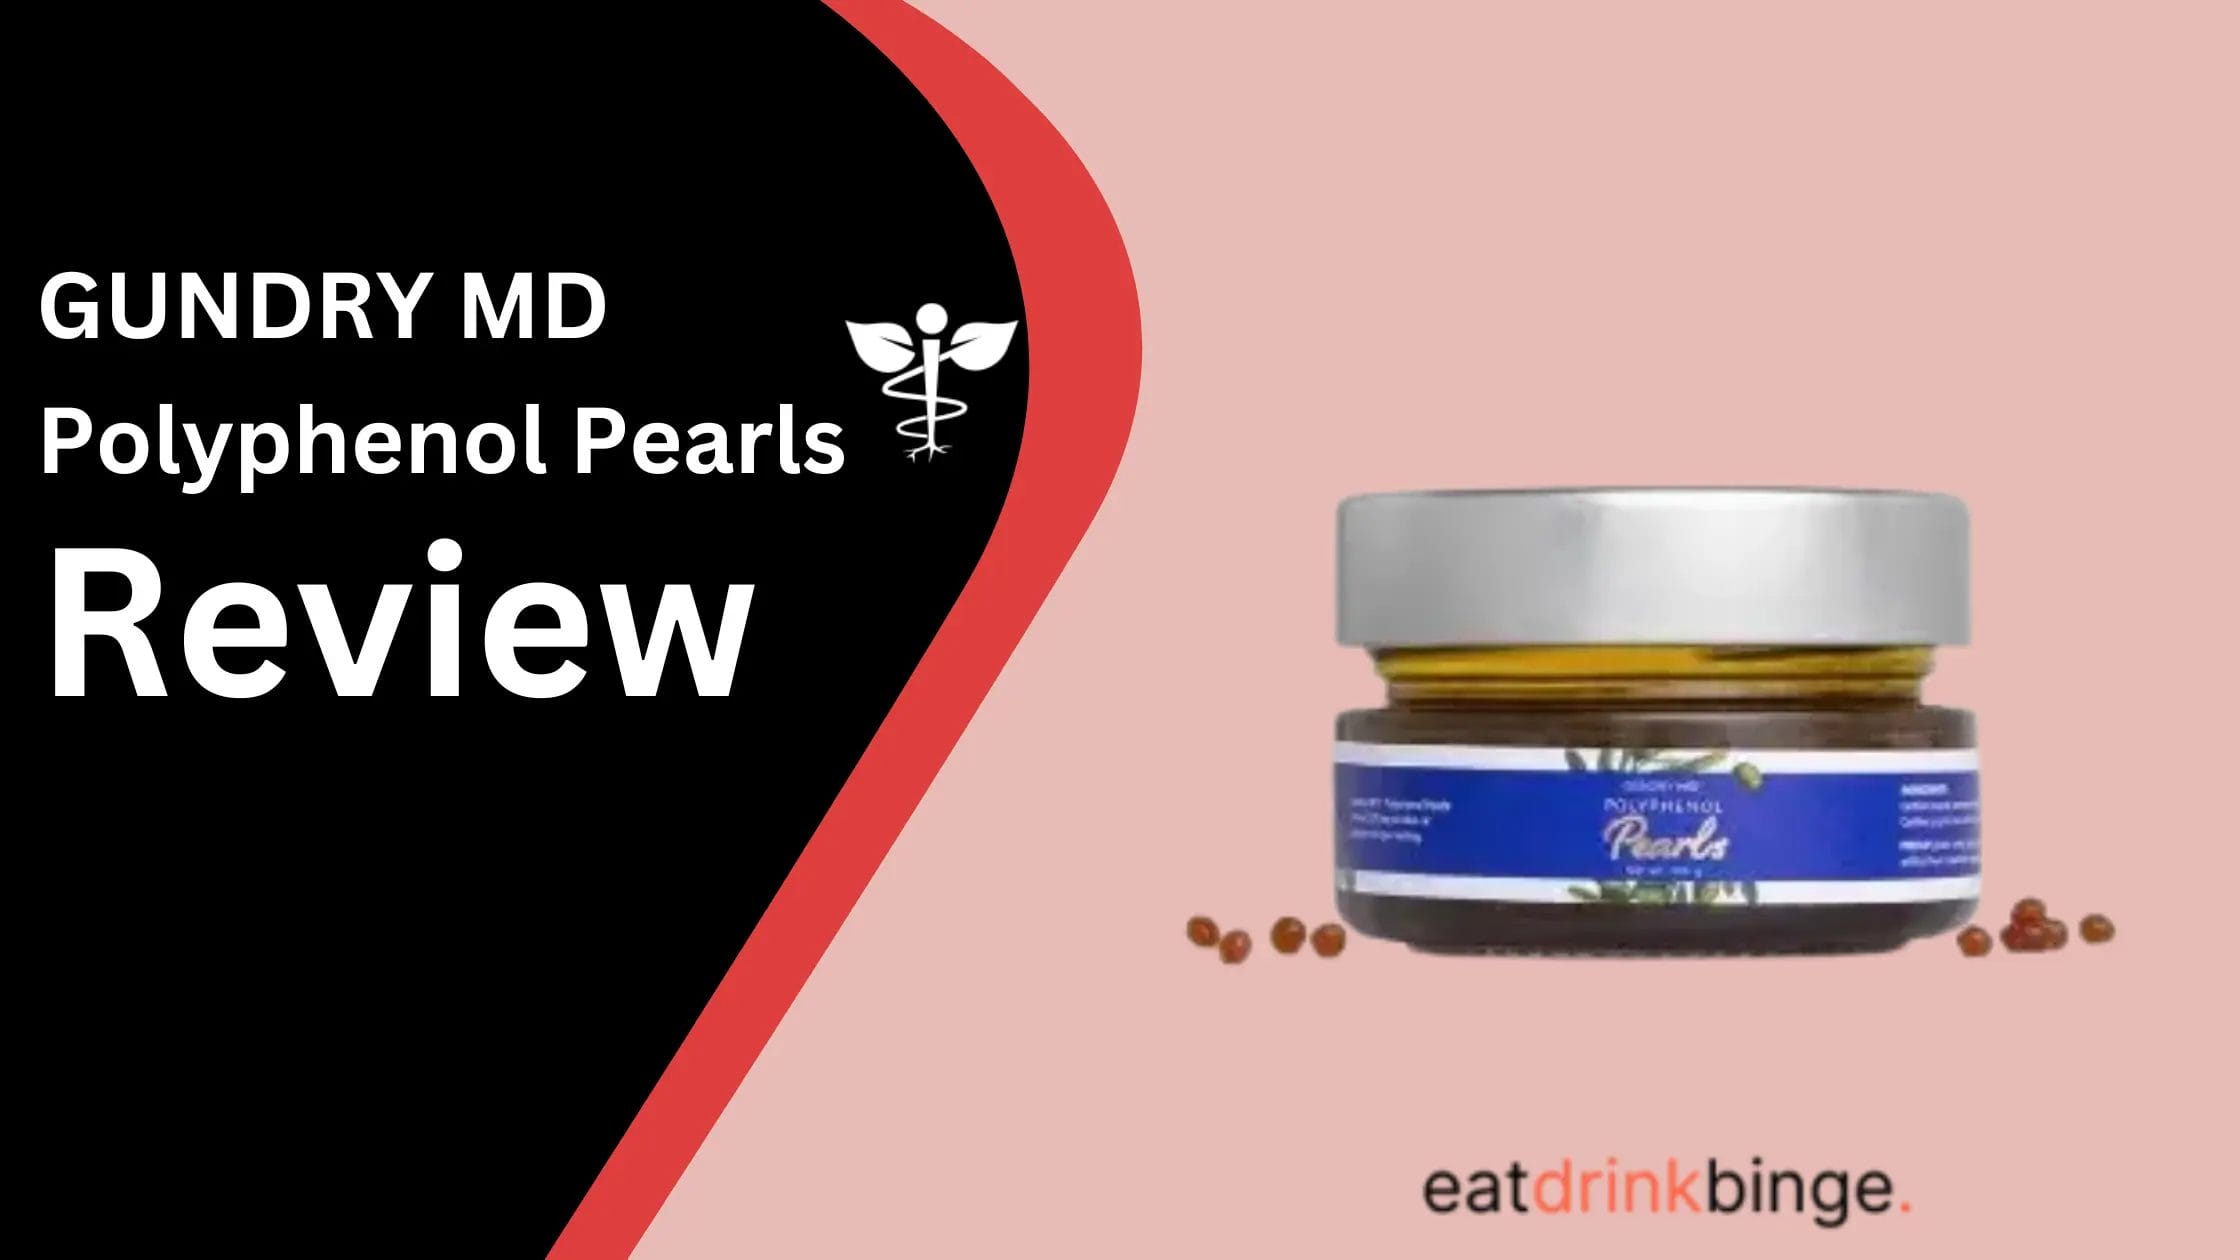 Polyphenol Pearls Review